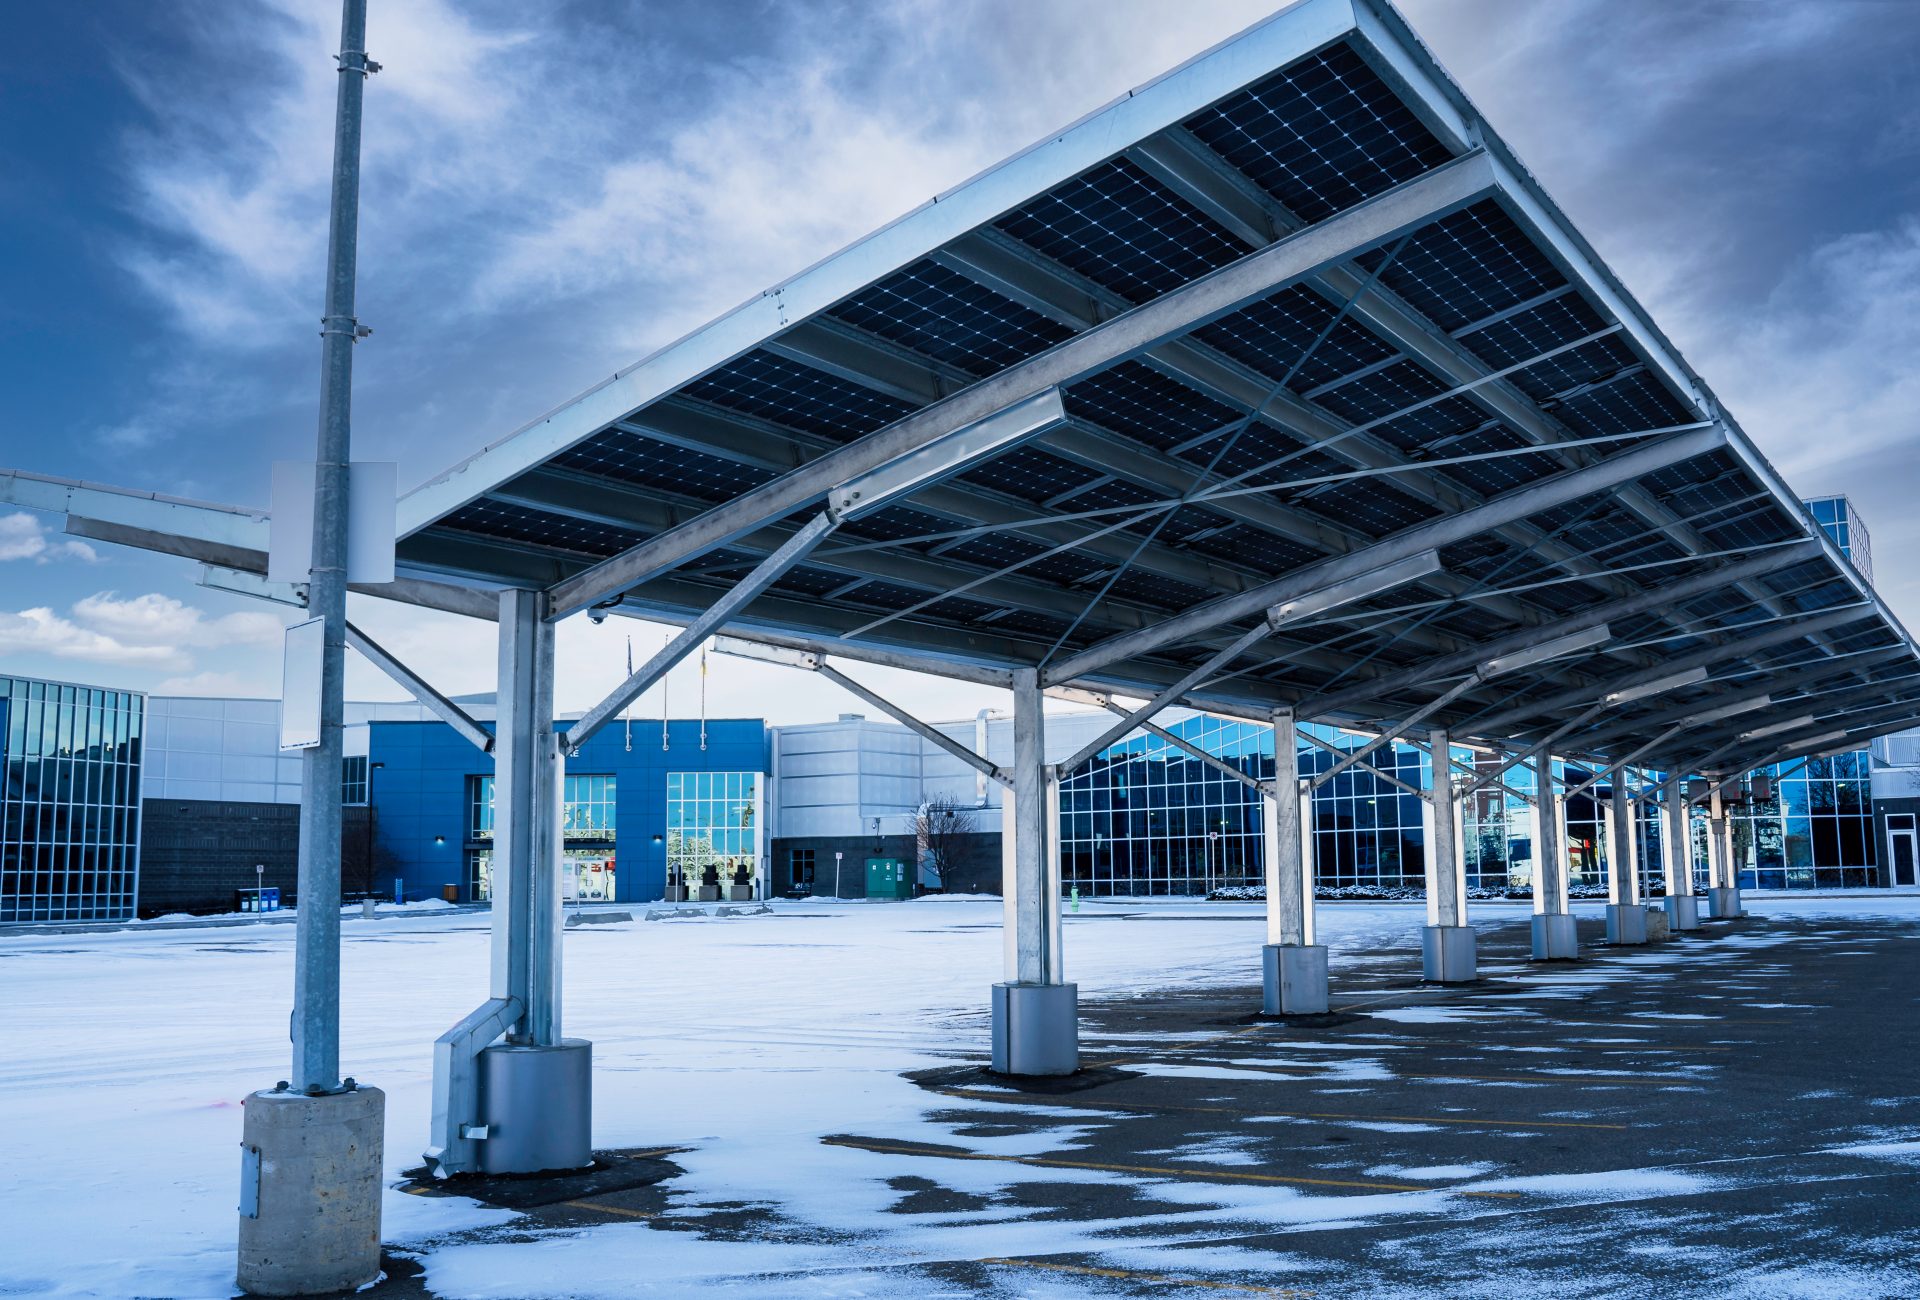 A solar carport for producing renewable energy and electric vehicles